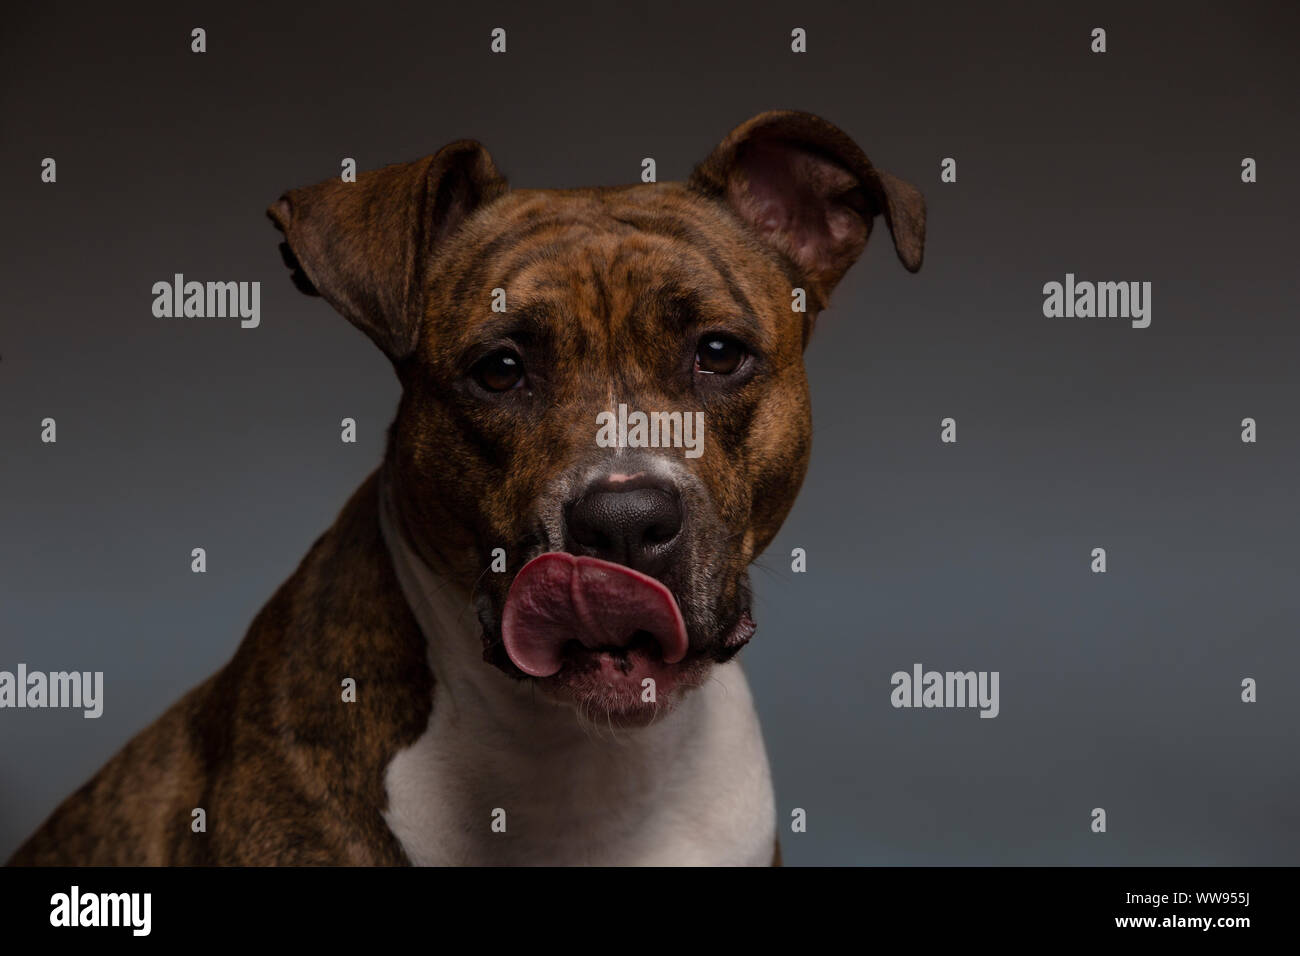 Beautiful potentially dangerous pit bull dog with sympathetic attitude and docile look on gray background Stock Photo